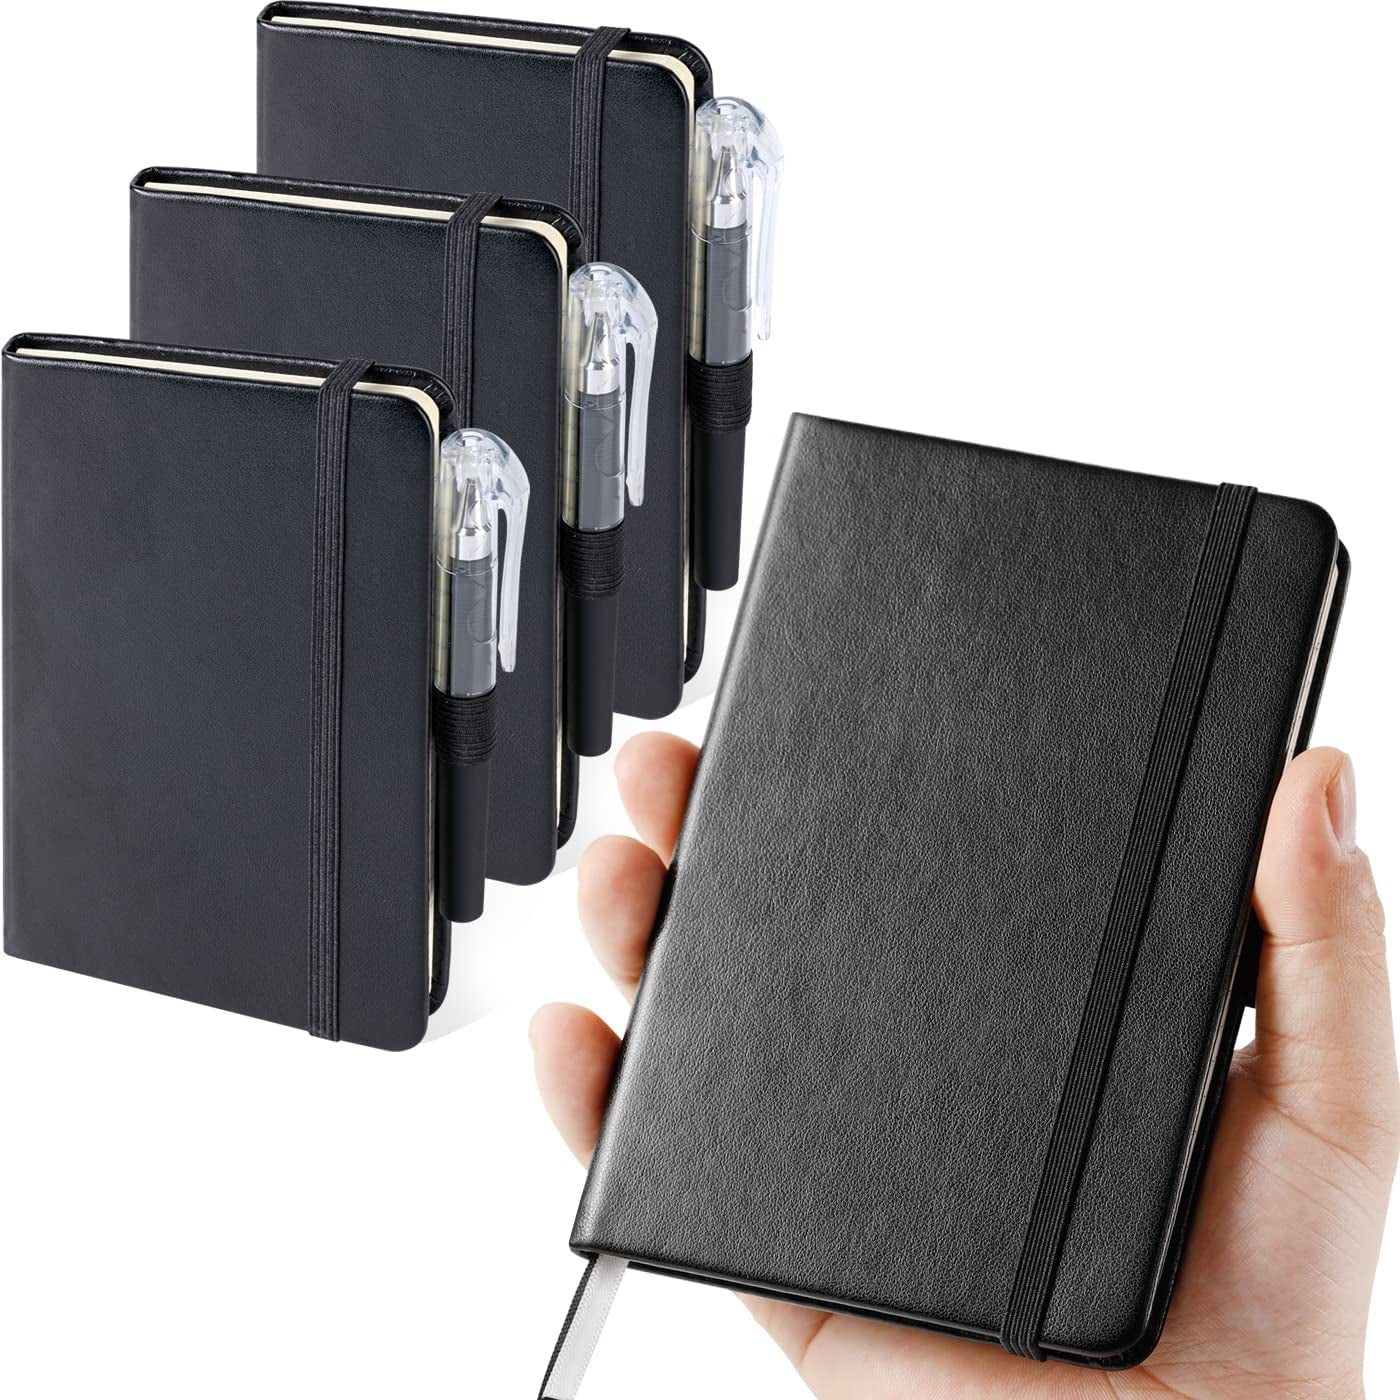 (3 Pack) Pocket Notebook Journal, Hardcover Small Mini Notebooks with Pens for Work, 3.7" X 5.7" A6 Notebook College Ruled with 100Gsm Premium Thick Lined Paper, Black Leather